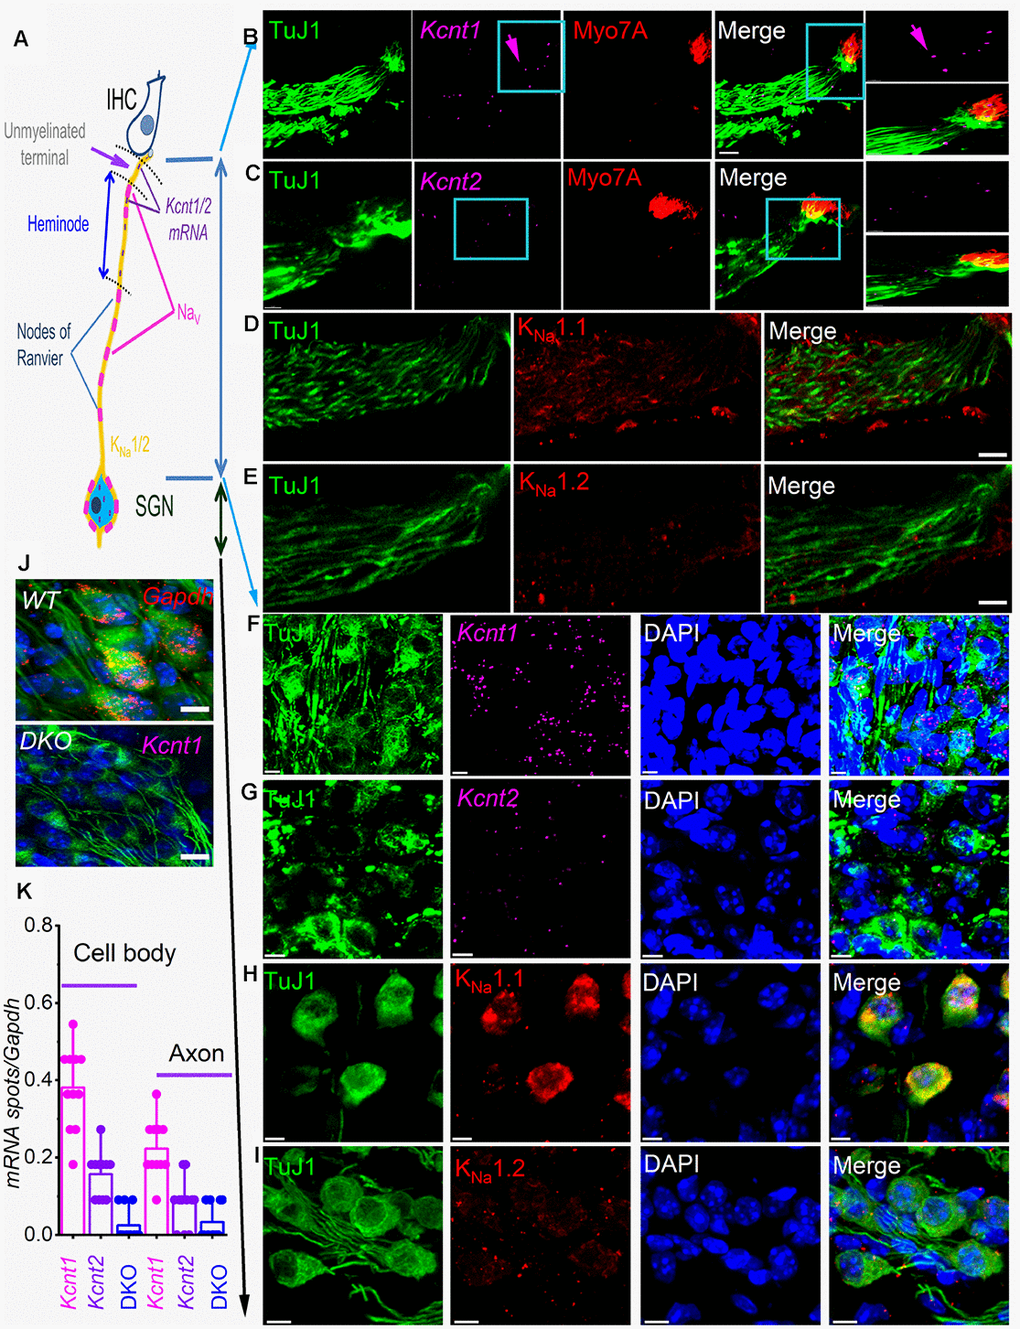 sm-FISH and immunocytochemistry localize transcripts and proteins for KNa1.1 and KNa1.2 in axons and cell bodies of spiral ganglion neurons (SGNs). Expression of KNa1-encoding transcripts in the SGNs was examined using smFISH and standard immunocytochemistry in the organ of Corti (OC)/SGN preparations from 1-mo old C57 mice (B–I). (A) Schematic illustration of the inner hair cell (IHC), type I SGN, the peripheral axon, and cell body. The unmyelinated terminal, heminode, and nodes of Ranvier are noted, but not to scale. (B) RNA molecules encoding for KNa1.1 (Kcnt1), and (C) KNa1.2 (Kcnt2), were detected as fluorescent spots (purple, arrow) in TUJ1-positive (green) SGN axons, IHCs were labeled with myosin 7A antibody (red), and merged images are shown. Axonal Kcnt1 mRNA were prominent, but only scant Kcnt2 mRNA spots were detected compared to the double knockout (DKO) samples (J). Scale bar = 10 μm (D–E) Images of cochlear sections of 1-mo old mice show that KNa1.1 (red) protein is expressed in the auditory nerve in D. Consistent with the faint expression of Kcnt2 mRNA in the axons in (E) there was virtually little or no detectable expression of KNa1.2 in axons of the auditory nerve. Scale bar = 10 μm. (F–G) mRNA spots (purple spots) encoding KNa1.1 (Kcnt1), and KNa1.2 (Kcnt2) in the cell bodies of SGNs. Very few spots for Kcnt2 mRNA were detected. Sections were co-labeled with neuronal (TuJ1, green) and nuclei markers (4,6-diamidino-2-phenylindole, DAPI, blue) Scale bar = 5 μm. (H–I) Images of the SGNs show KNa1.1 (red) protein is expressed in cell bodies of the auditory nerve. In keeping with low levels of expression of mRNA, KNa1.2 protein expression was faintly positive. The mean number of RNA molecules detected per SGN was calculated as described in the Methods. Kcnt1 levels were higher compared to Kcnt2 in both mRNA and protein levels. (J) (Upper panel). Photomicrograph showing SGN mRNA spots (red spots) encoding Gapdh (data was obtained from DKO tissue). (Lower panel) DKO cochlear section, using kcnt1 probe serving as negative controls. Similar data were obtained using the kcnt2 probe (data not shown). Scale bar = 5 μm. (K) Values of mRNA spots in axons and cell bodies were normalized against Gapdh mRNA spots/100 μm2 (11 ± 2 spots (n = 31)) are summarized in the form of bar graphs. The mean (mean ± SD) was (cell body, kcnt1 = 0.38 ±.0.11; kcnt2 = 0.16 ± 0.06; DKO = 0.02 ± 0.04; n = 11 animals; derived from 50 randomly selected cells and evaluated by 5 blinded individuals. The mean (mean ± SD) was (axons, kcnt1 = 0.22 ±.0.07; kcnt2 = 0.08 ± 0.06; DKO = 0.03 ± 0.05; n = 11 animals; derived from 50 randomly selected cells and evaluated by 5 blinded individuals.